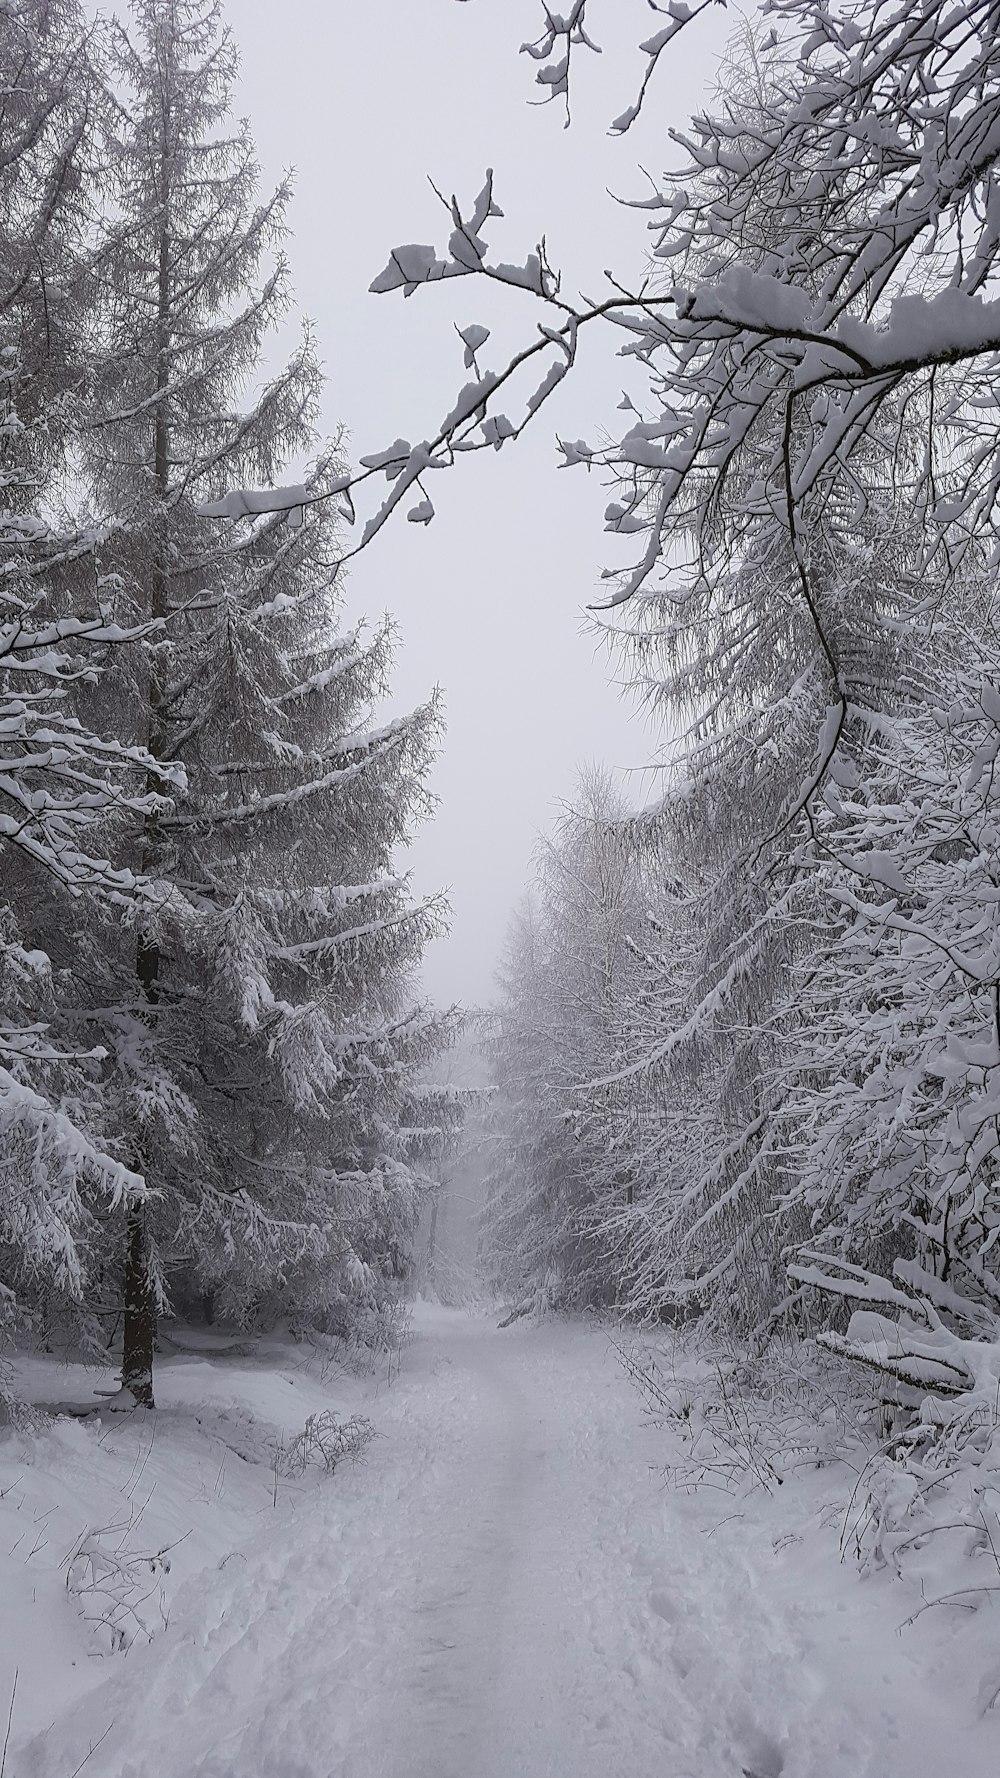 a snow covered road surrounded by tall trees